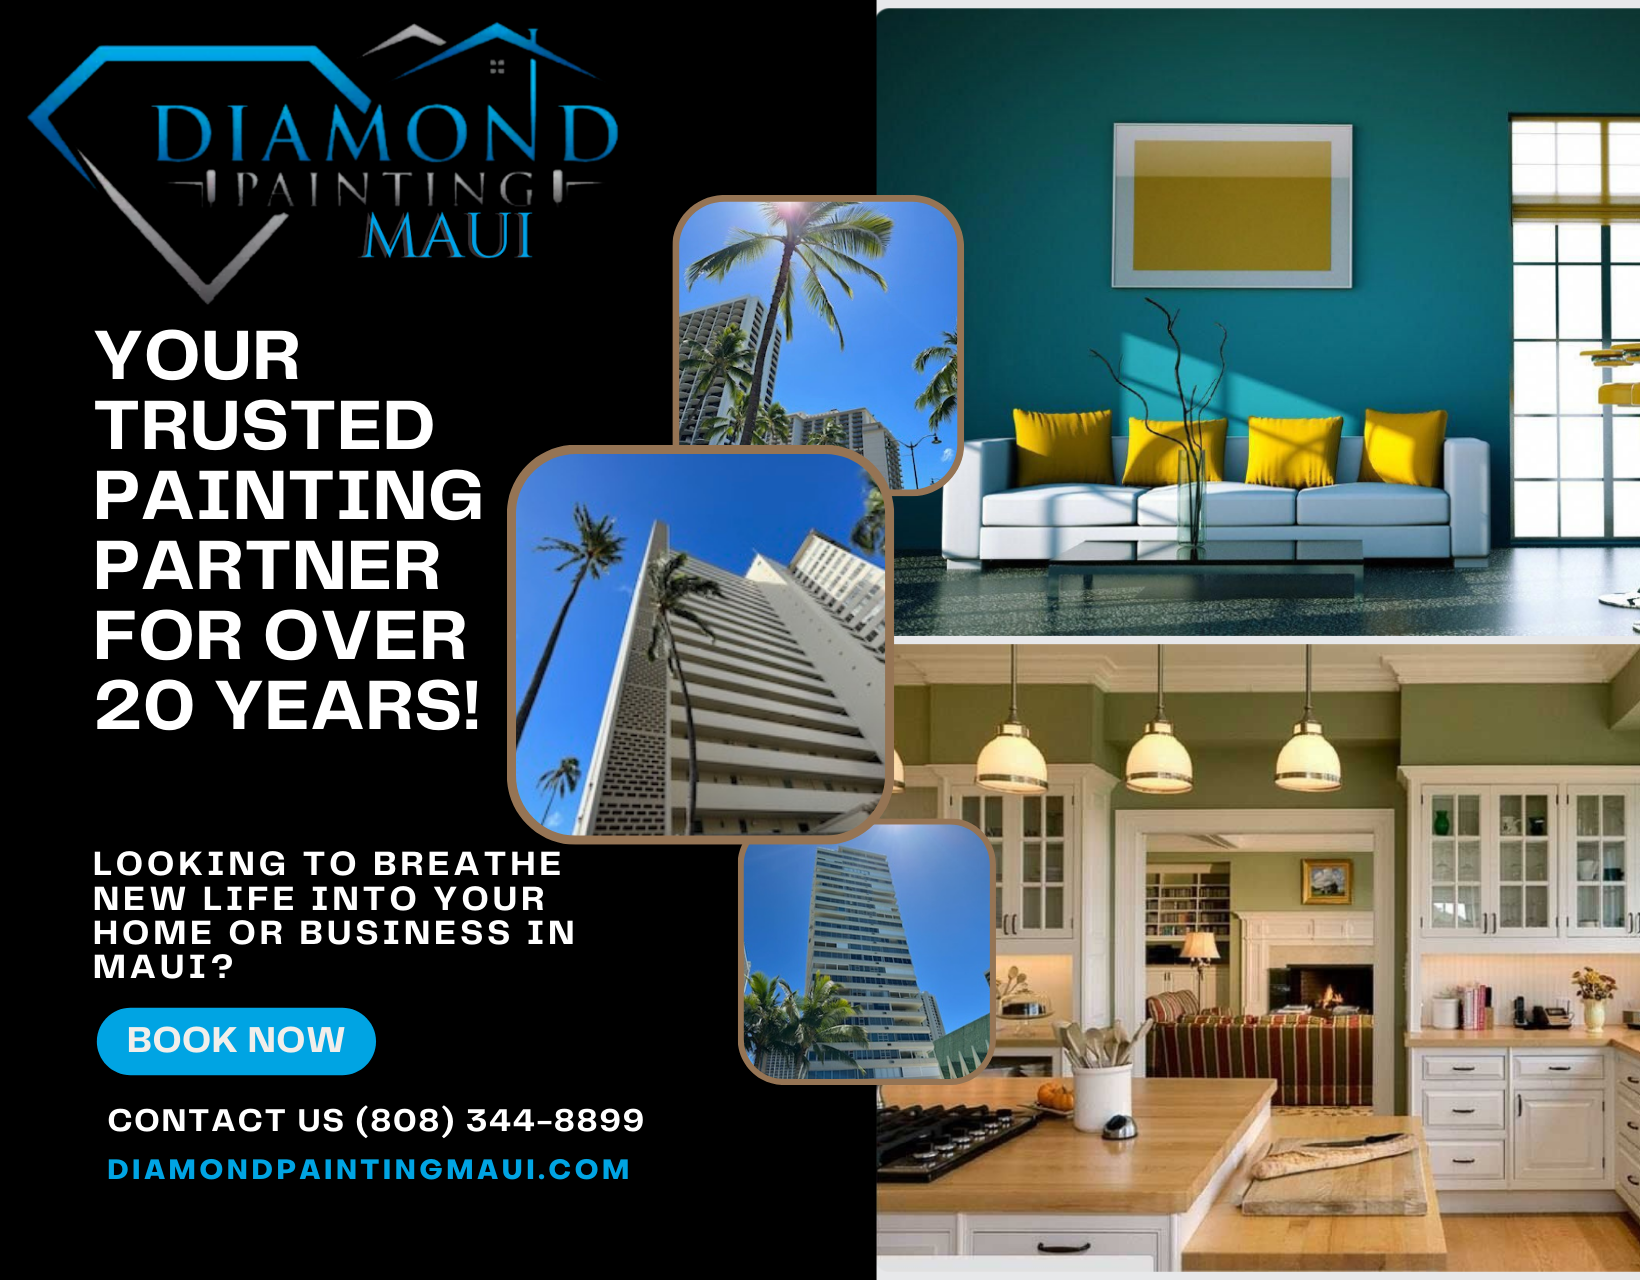 Looking to breathe new life into your home or business in Maui?